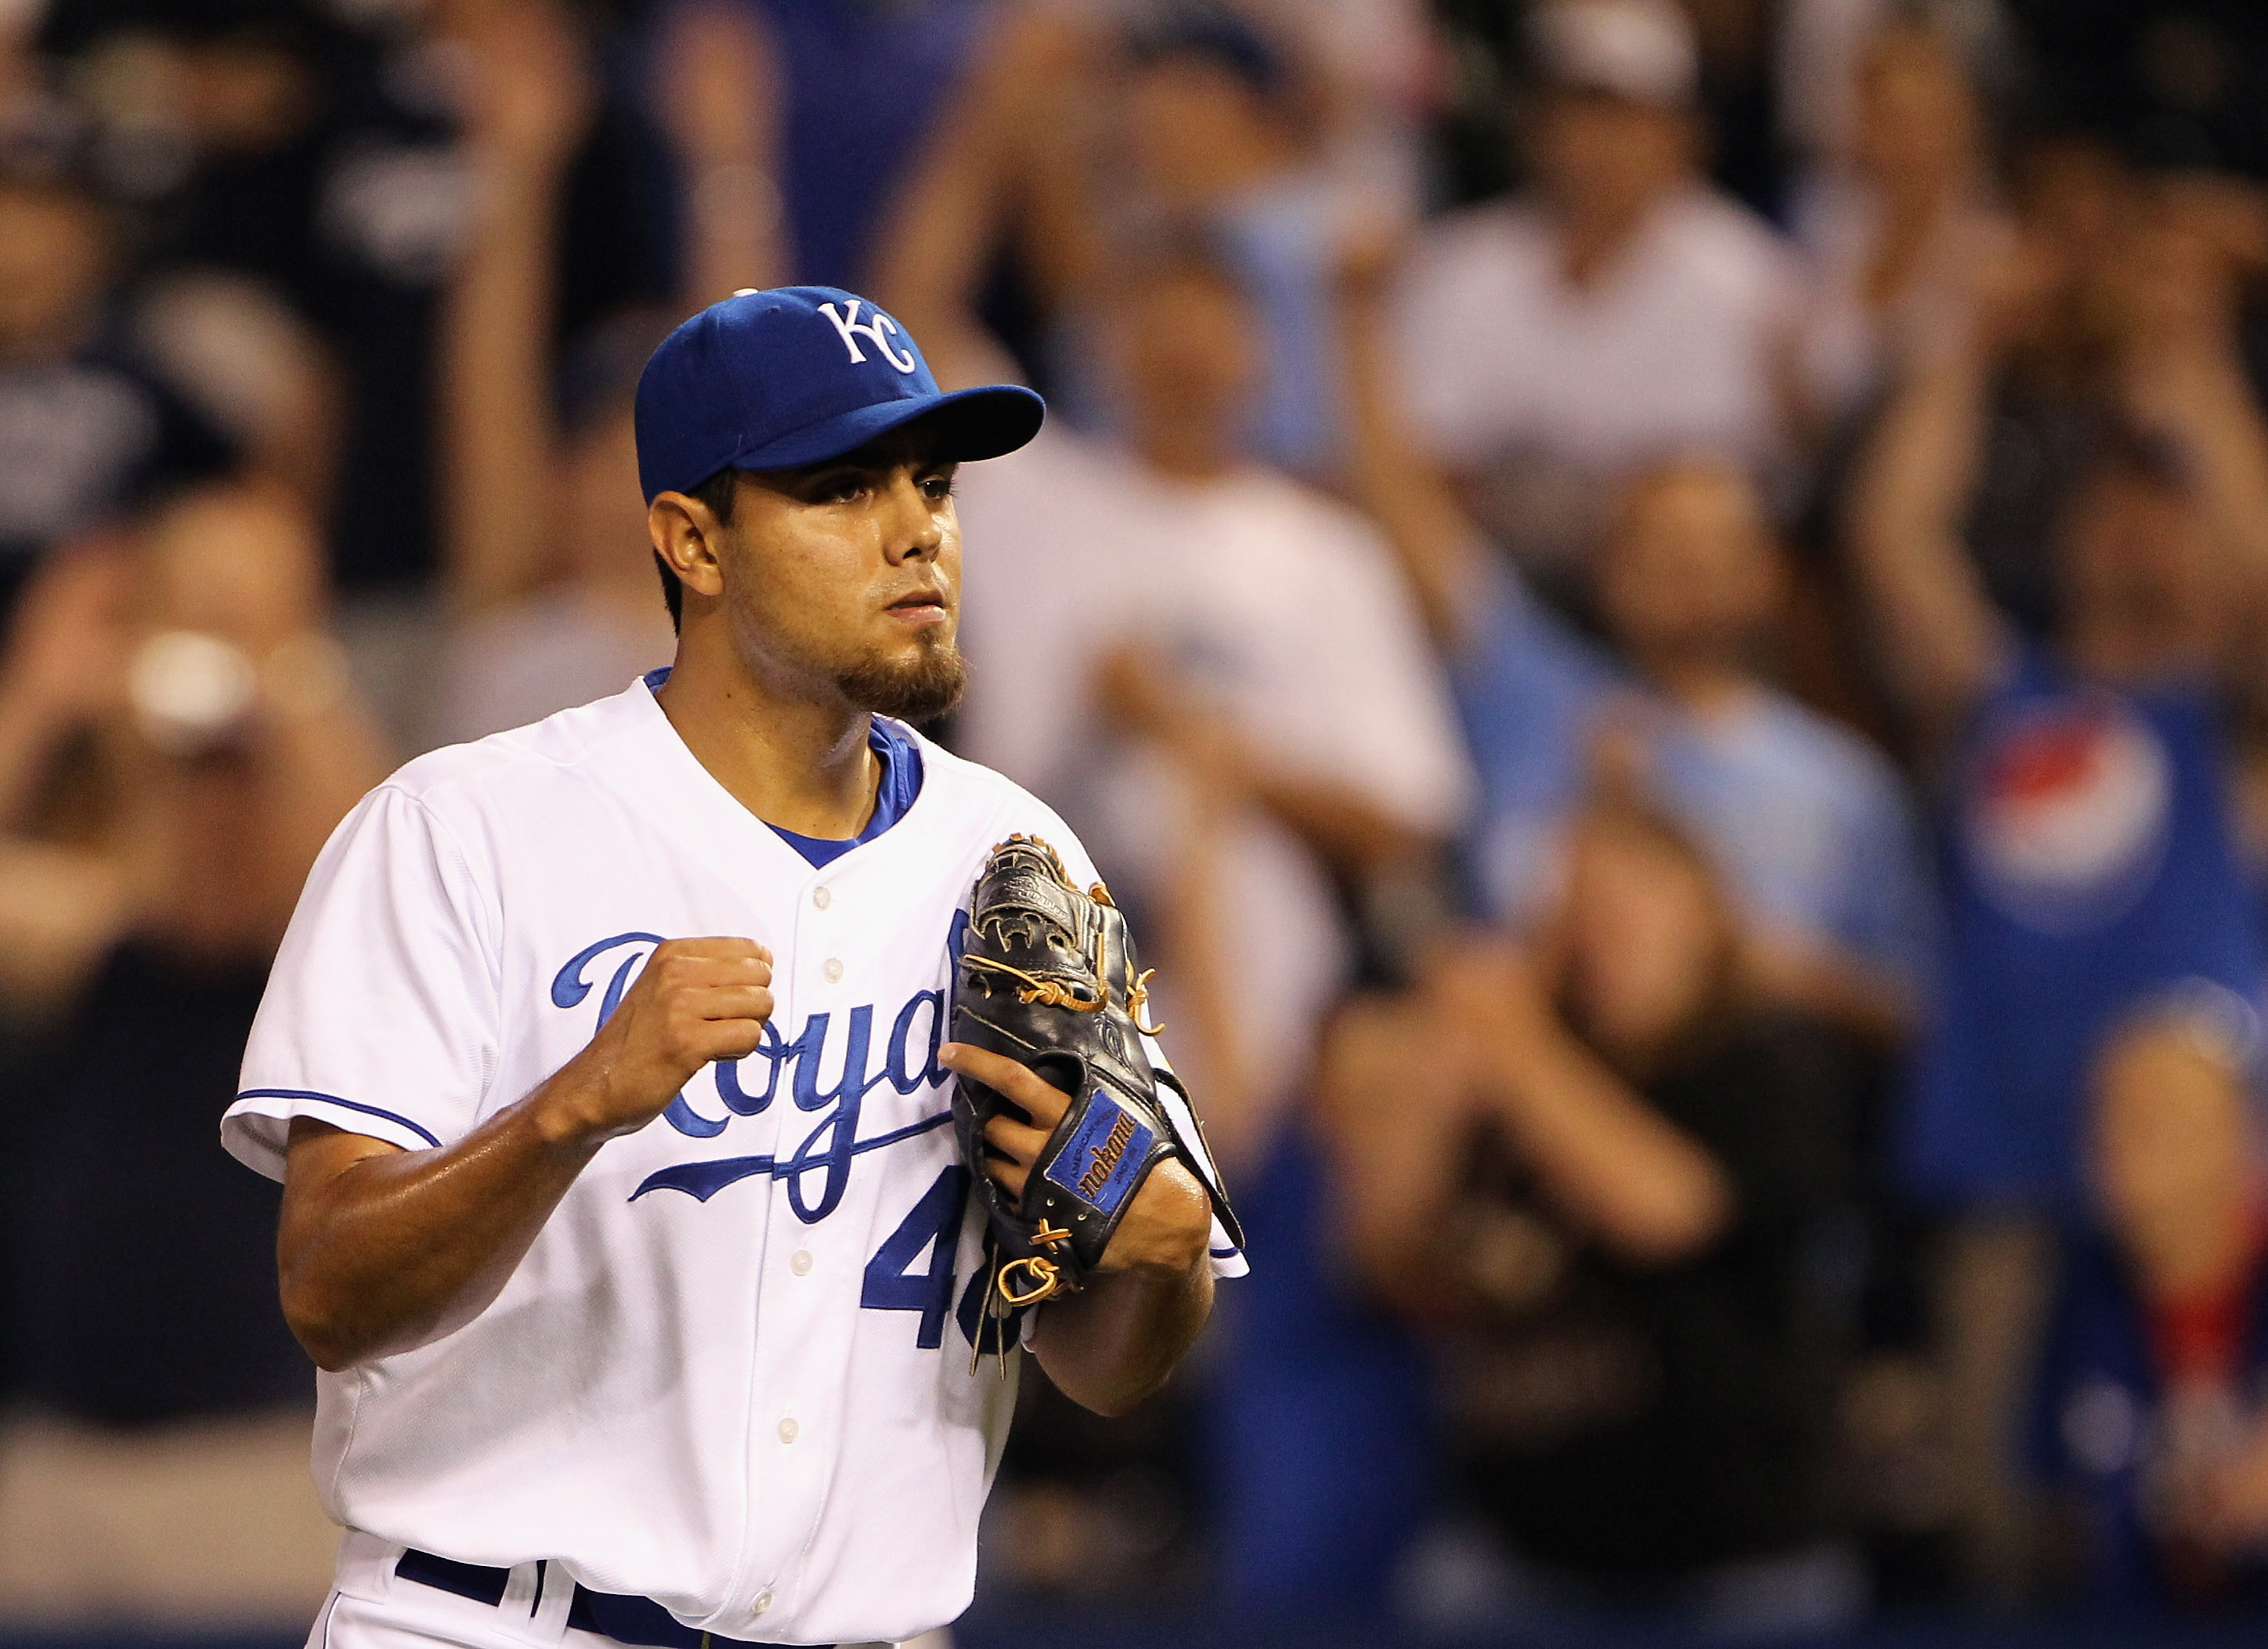 KANSAS CITY, MO - AUGUST 13:  Pitcher Joakim Soria #48 of the Kansas City Royals pumps his fist  after the Royals defeated the New York Yankees 4-3 to win the game on August 13, 2010 at Kauffman Stadium in Kansas City, Missouri.  (Photo by Jamie Squire/Ge